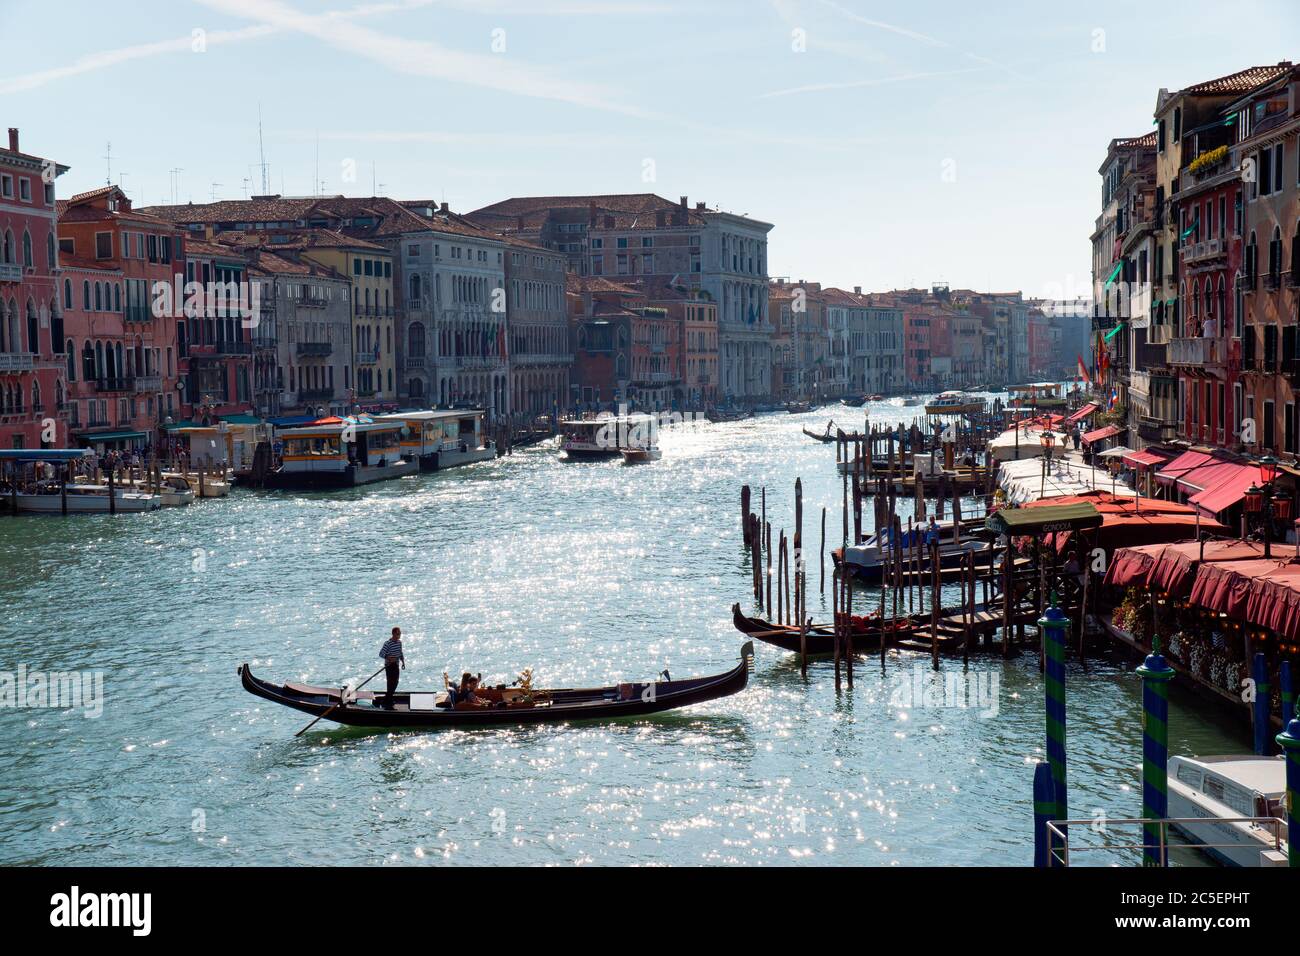 Oct. 1, 2019 - Venice, Italy: view to the Grand Canal from Rialto Bridge. Stock Photo